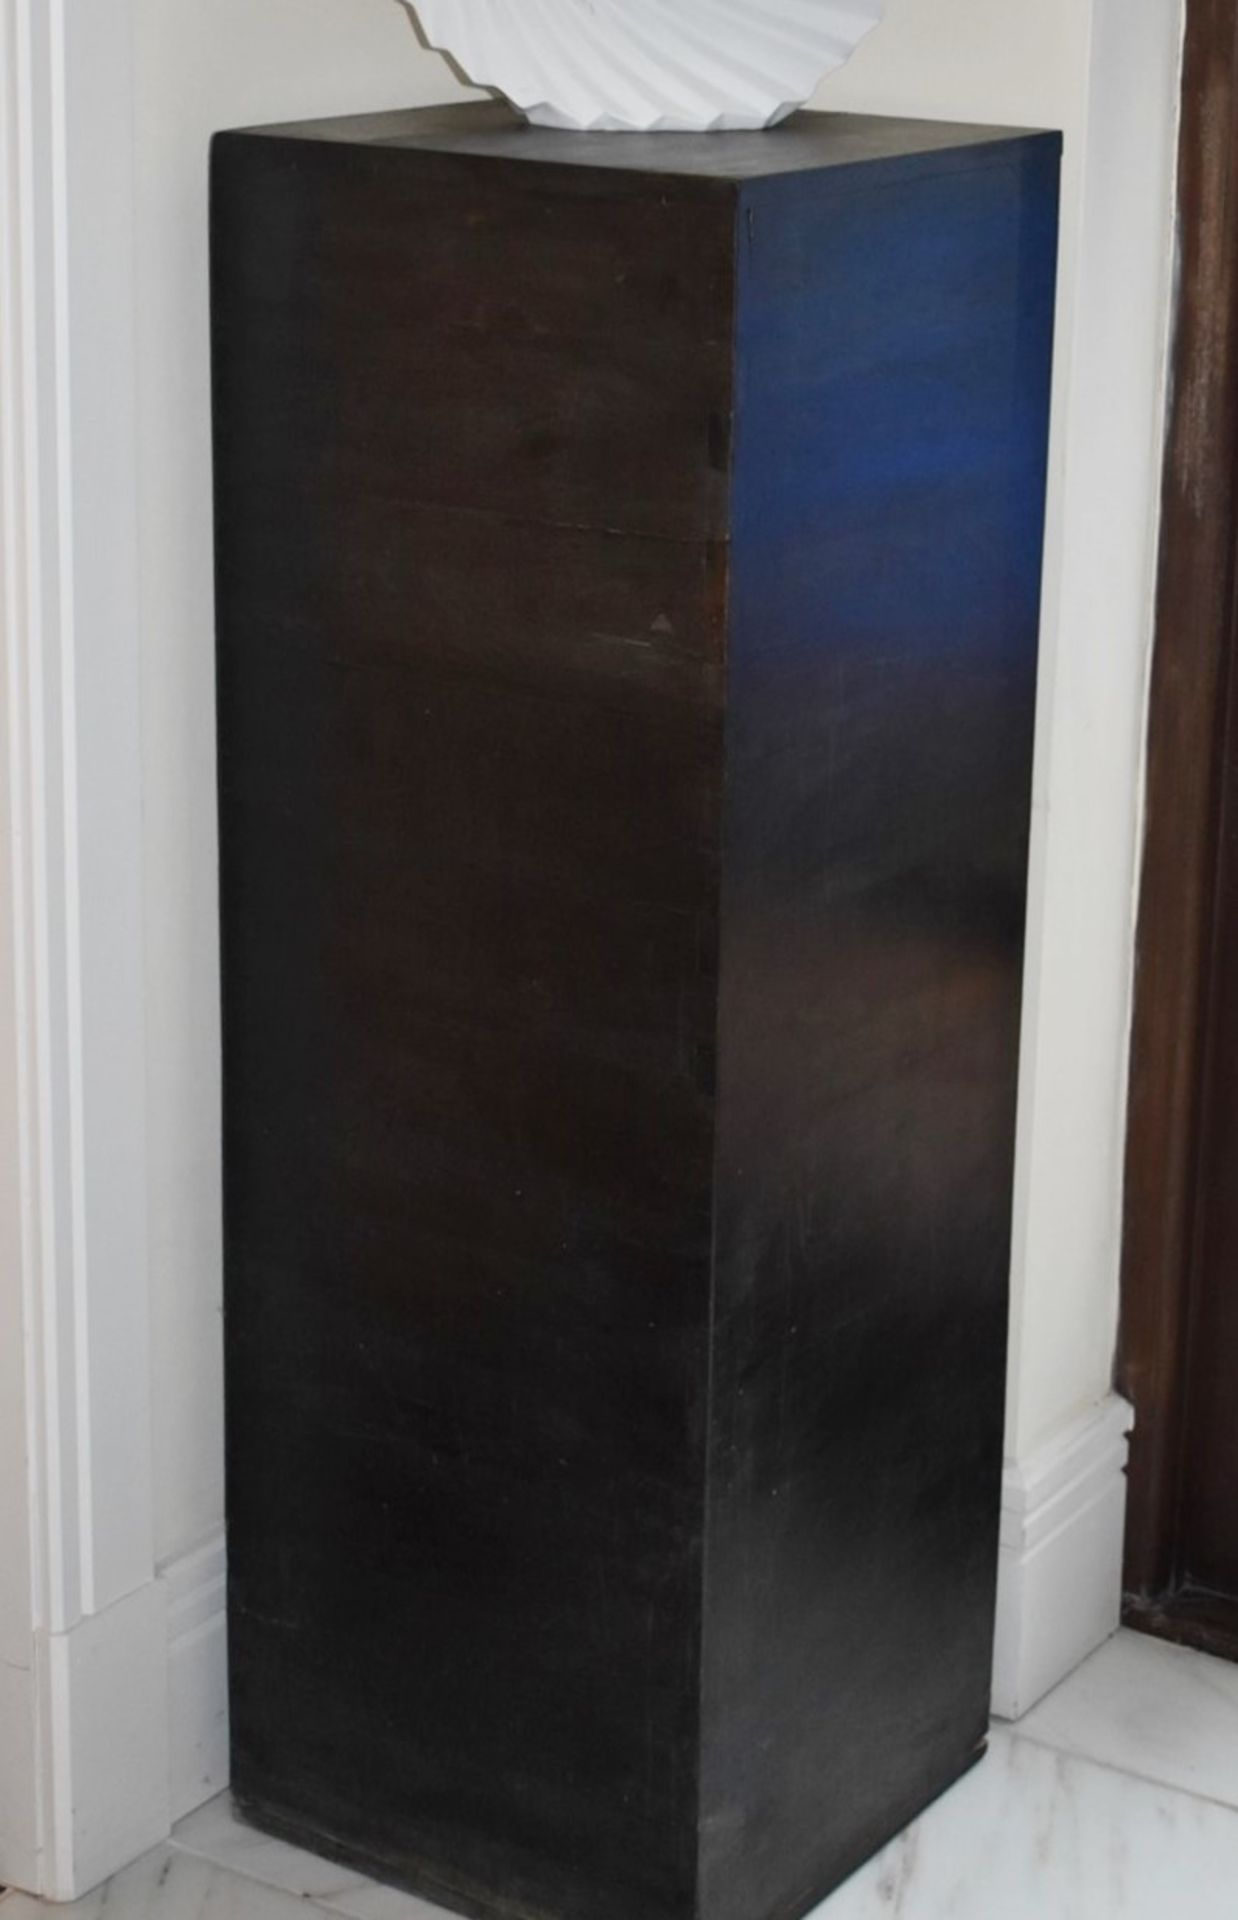 Pair of Tall Wooden Gallery Display Plinths With a Dark Wooden Finish - Ideal For The home, Art - Image 2 of 3